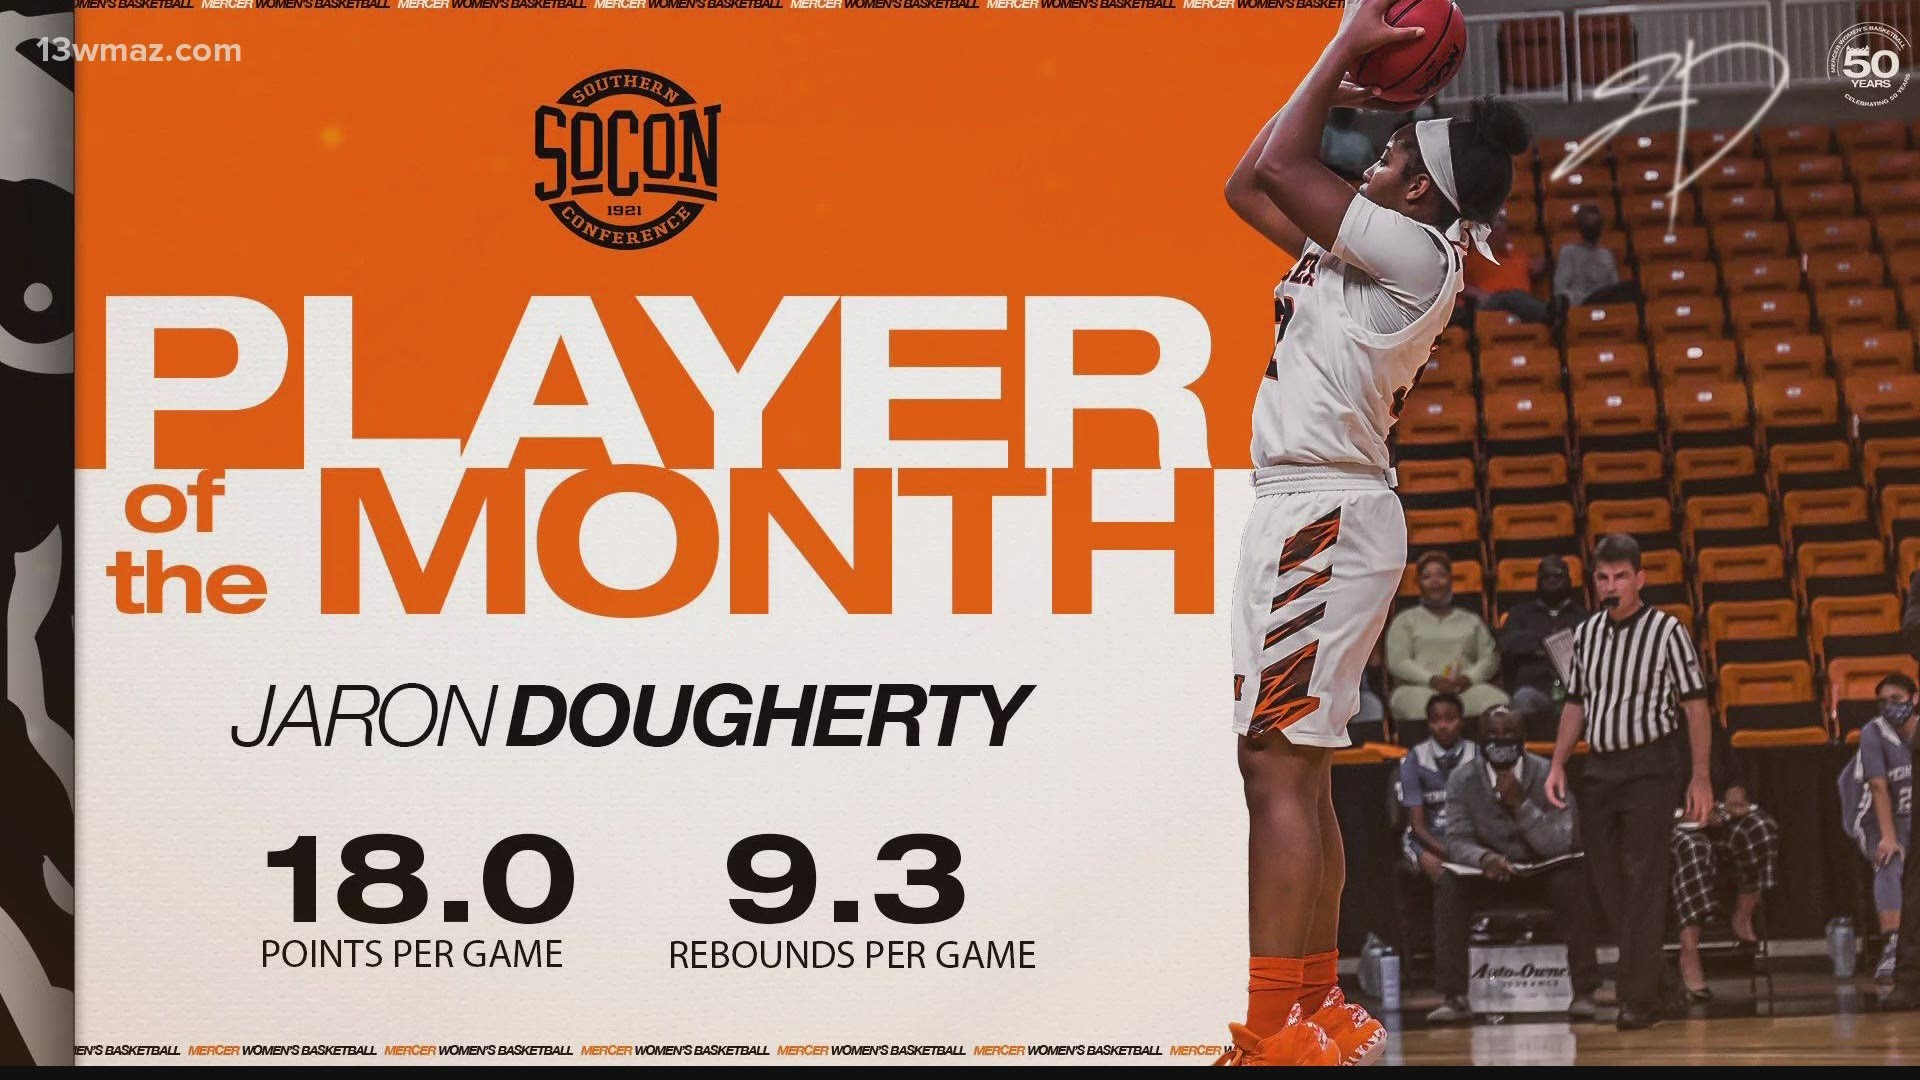 Mercer junior Jaron Dougherty was named the Southern Conference Women's Basketball Player of the Month for December.